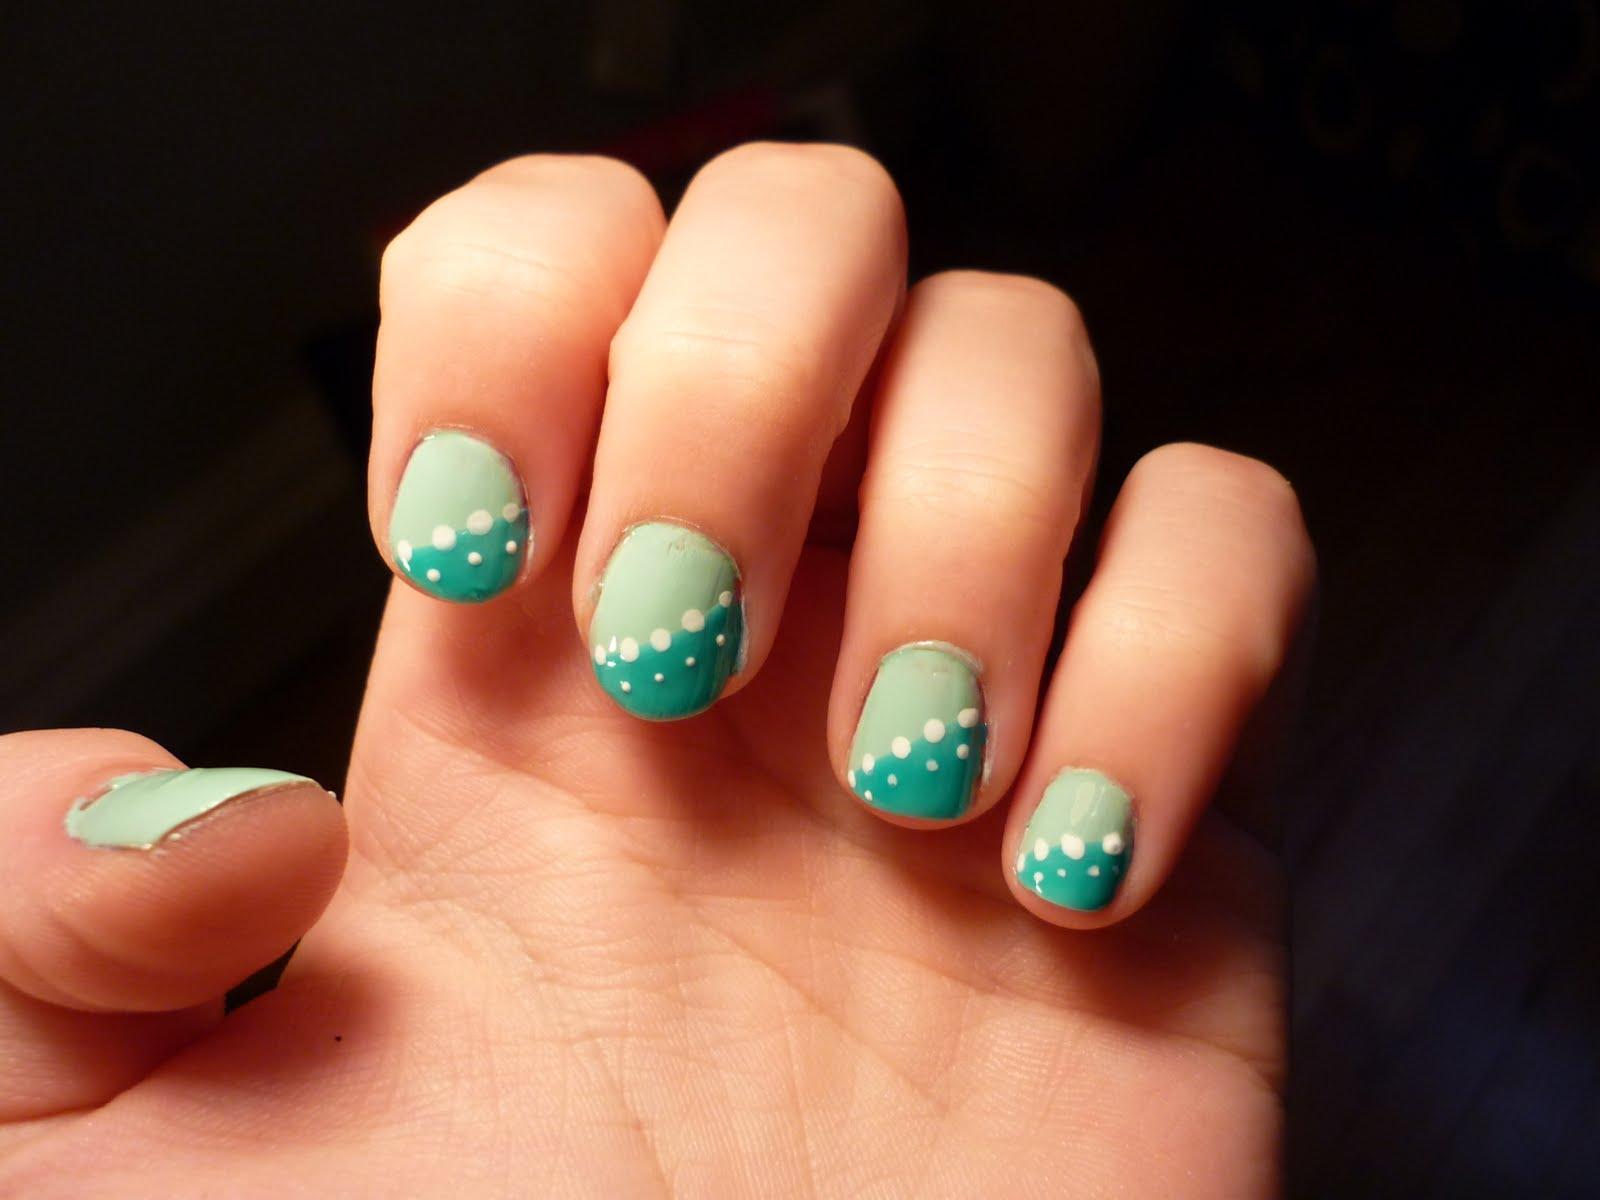 1. Simple Nail Art Designs for Beginners - wide 3